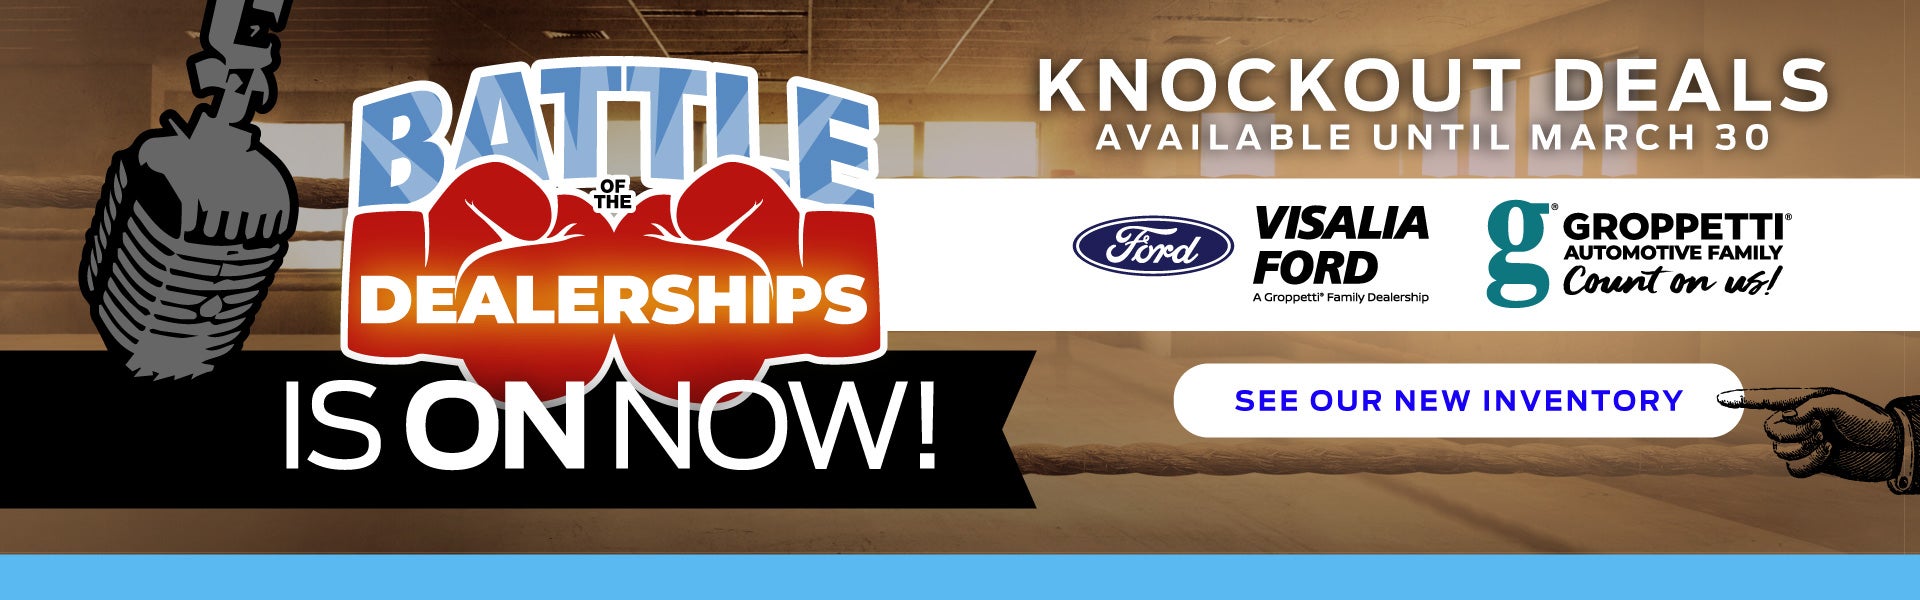 Battle of the Dealerships is ON NOW! Only at Visalia Ford!